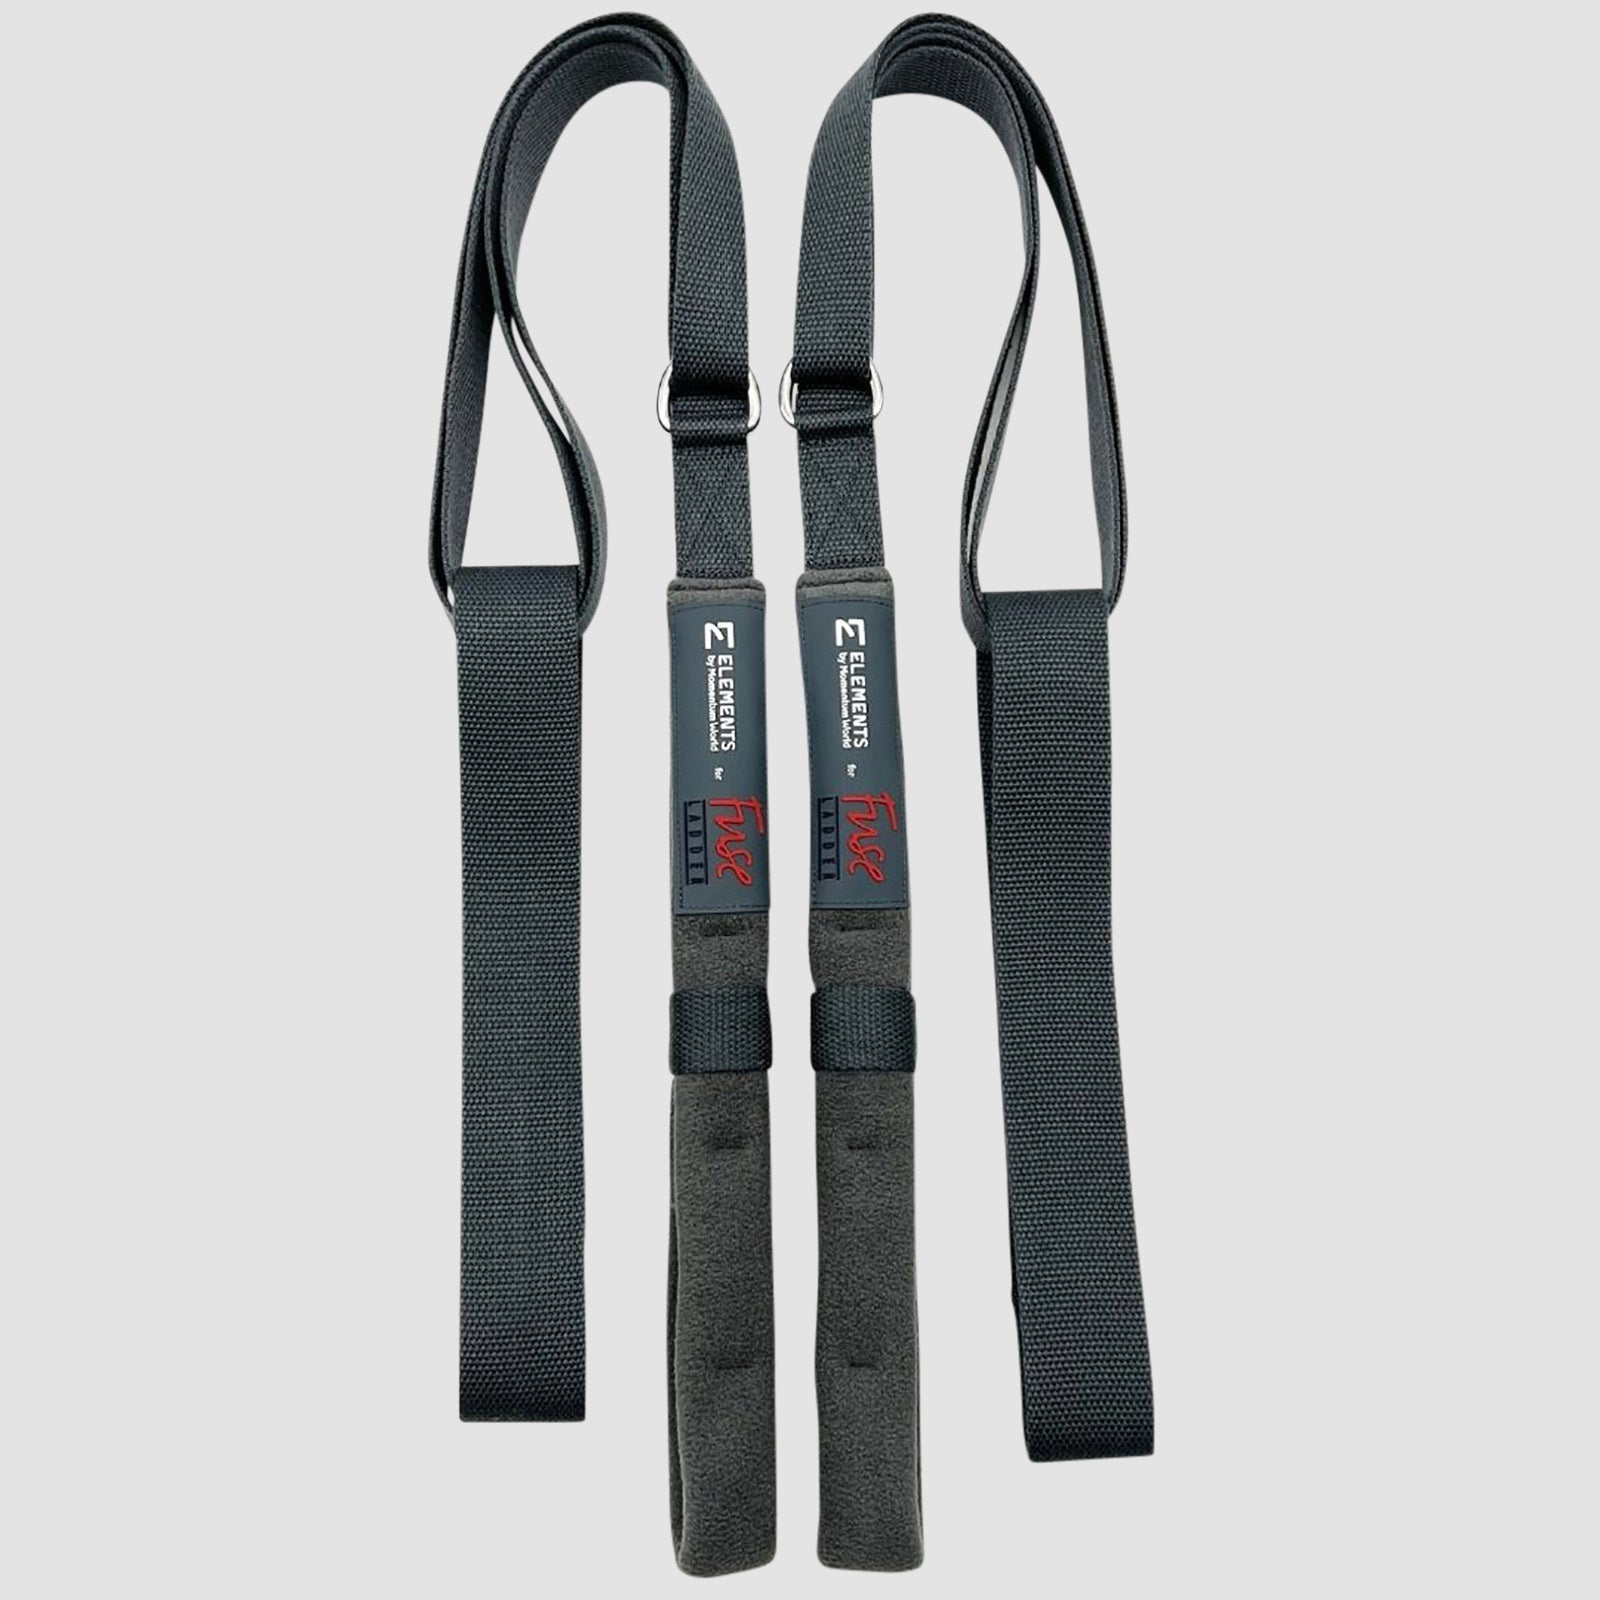 Our Fuse wall Ladder adjustable padded circus straps can be used for calisthenics, gymnastics ring exercises, and Pilates Cadillac inversions.